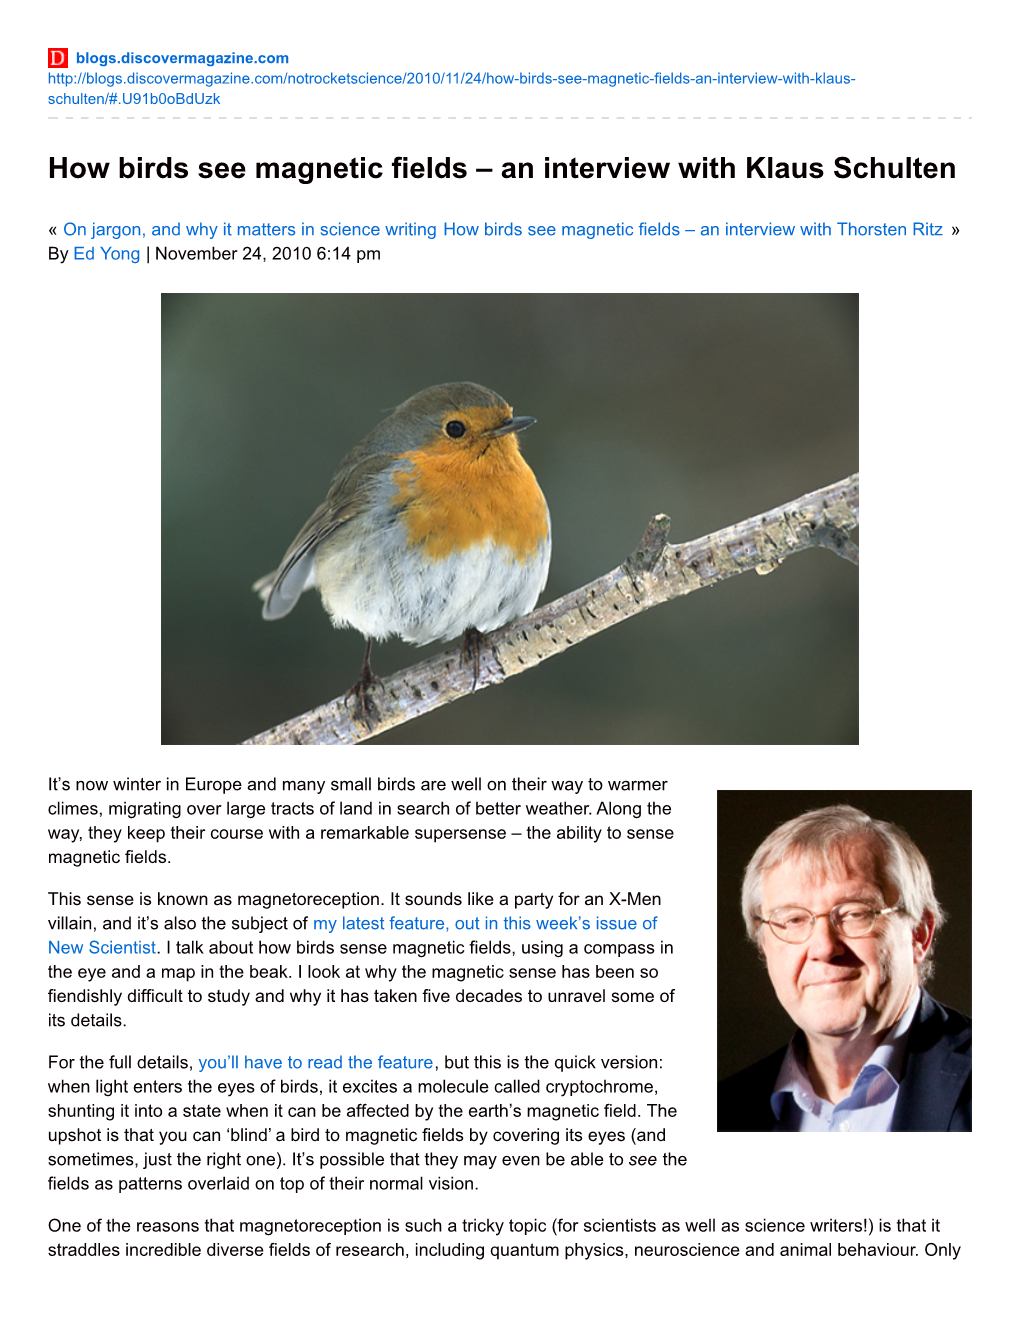 How Birds See Magnetic Fields – an Interview with Klaus Schulten